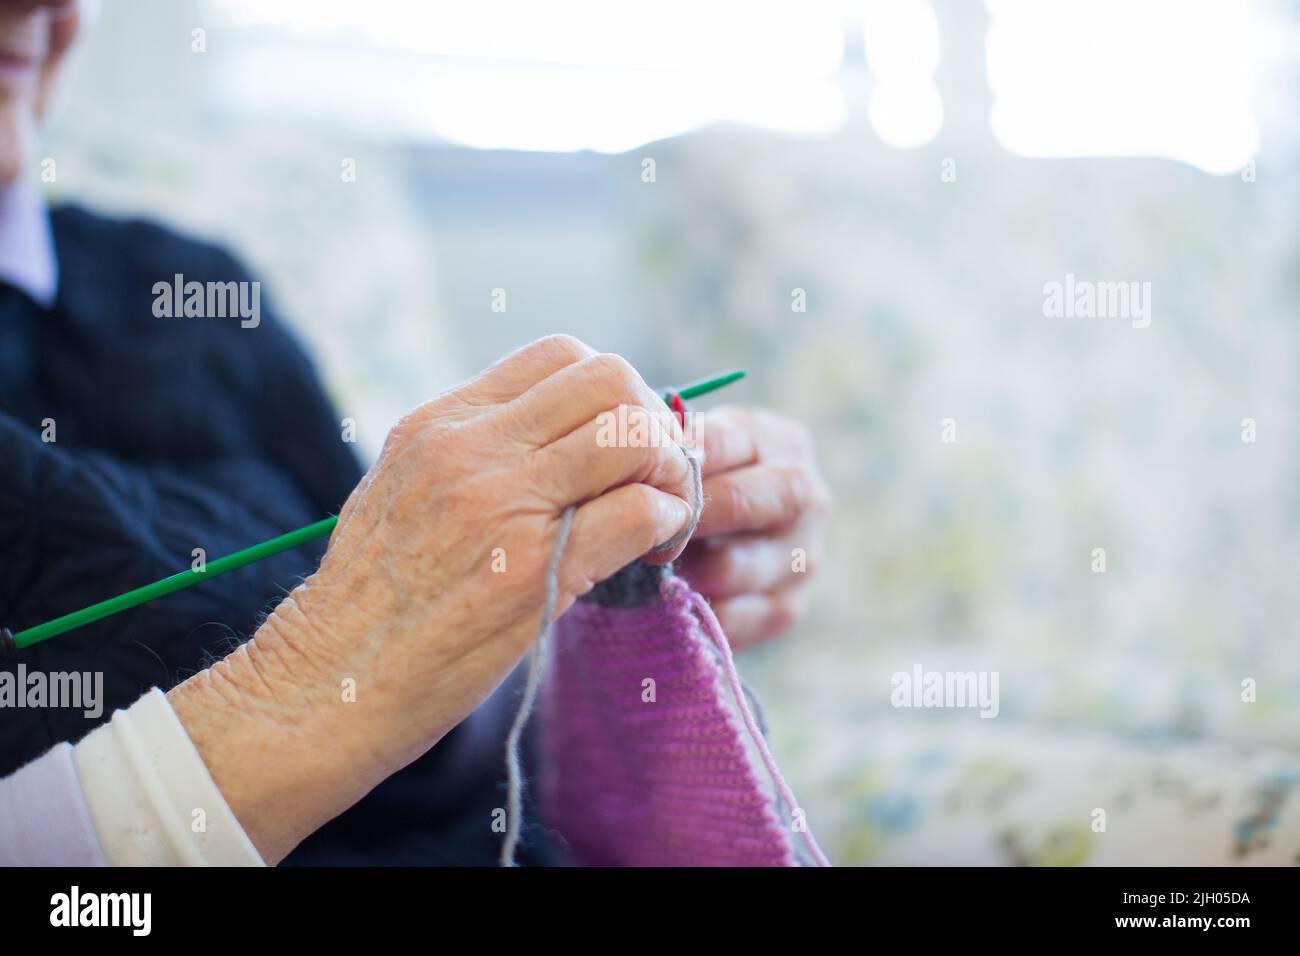 CLOSE UP OF THE HANDS OF AN ELDERLY LADY IN AN AGED CARE HOME KNITTING Stock Photo